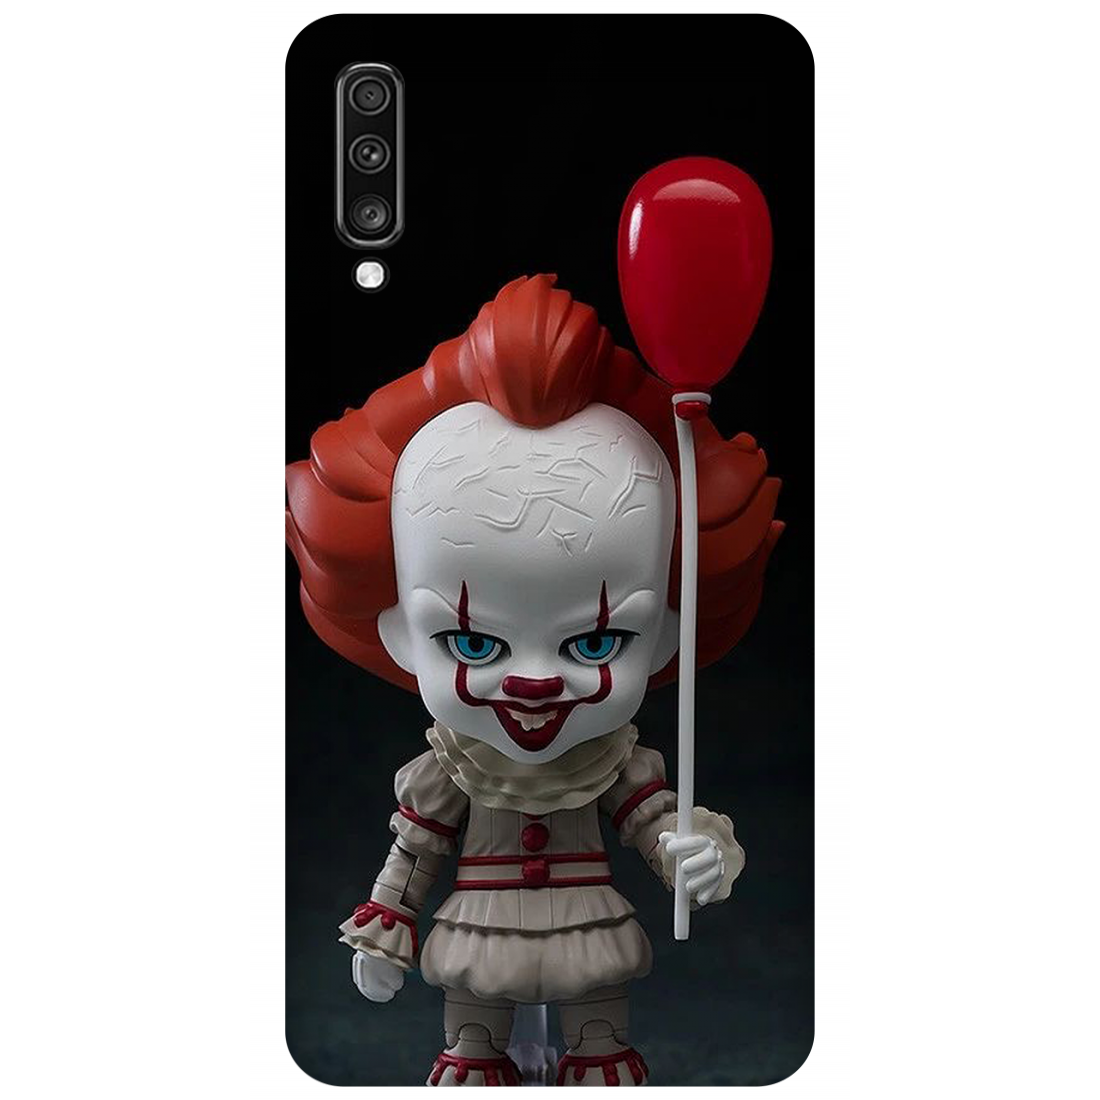 Pennywise Toy Figure Case Samsung Galaxy A70